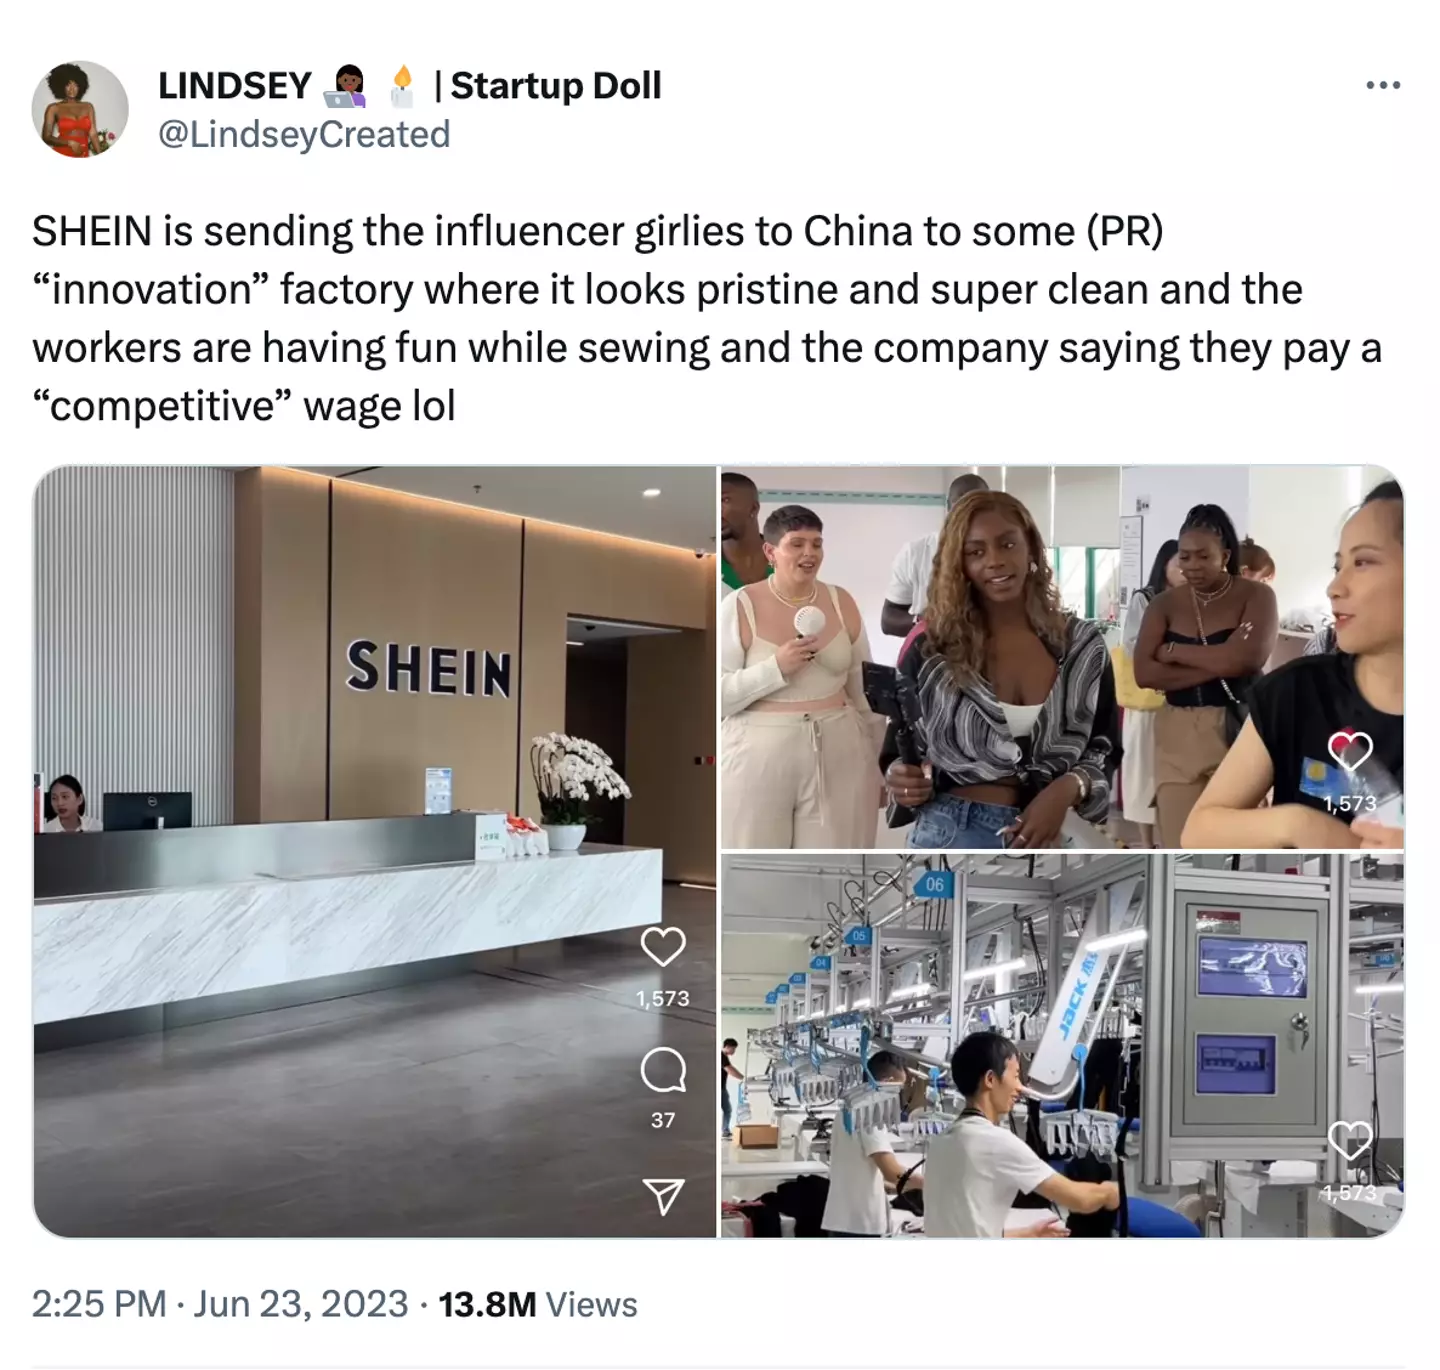 People have slammed the influencers for promoting the brand.